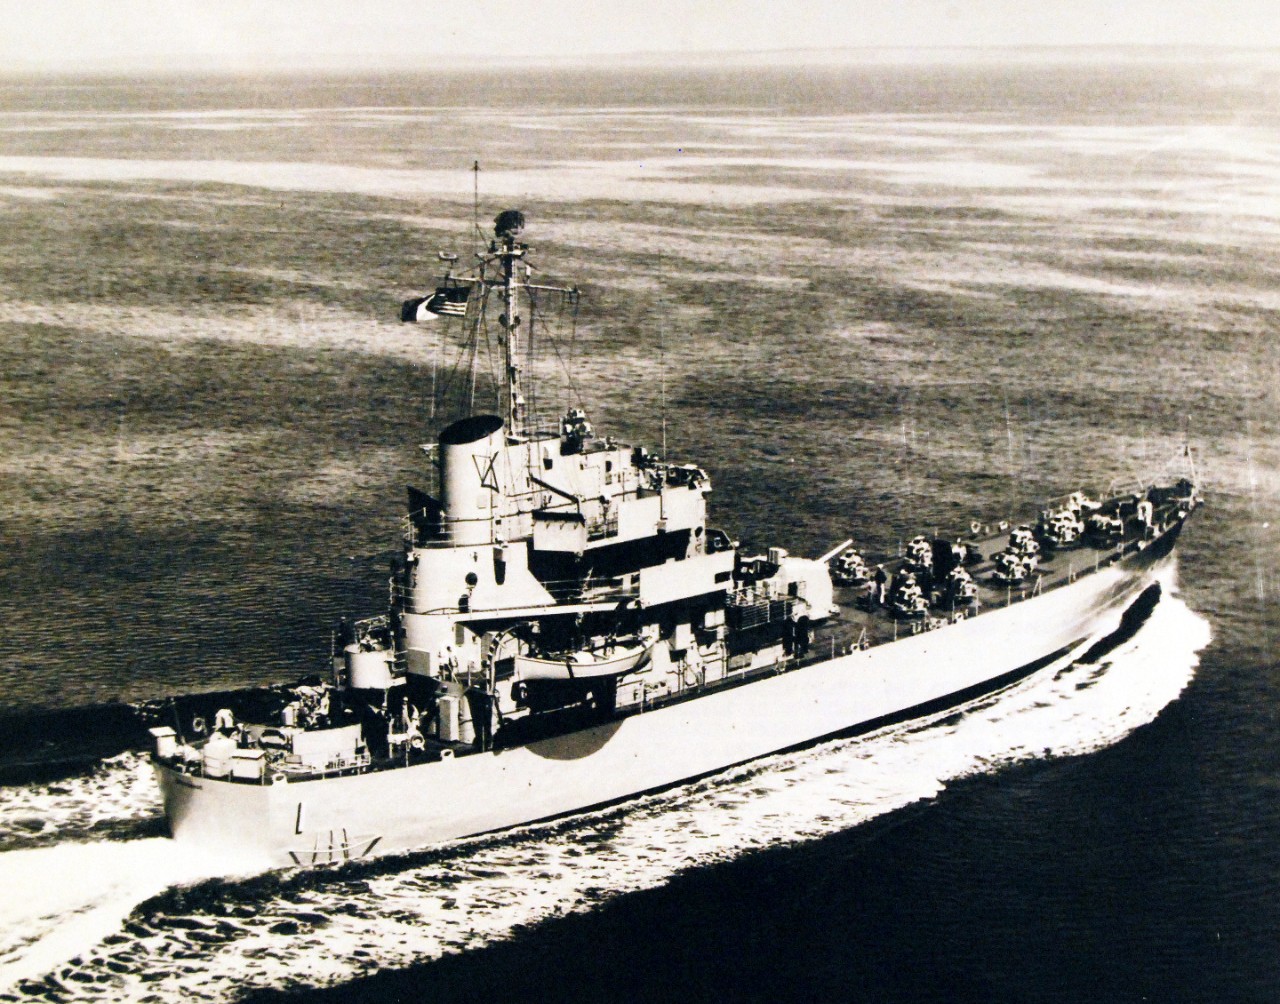 330-PS-7429 (USN 668544):  USS Carronade (IFS-1), 1955.    Carronade,  a new-type of U.S. Navy ship into which the latest improvements in shipboard habitability have been built, was commissioned on May 25 in a ceremony at the Puget Sound Naval Shipyard, Bremerton, Washington.   Designated as an inshore fire support ship, Carronade is designed to replace the LSMR (medium landing ship, rocket), which was employed during World War II to give close-in fire support to the troops ashore.   This photograph shows crew members standing by on deck as Carronade glides across the waters of Puget Sound during sea trials, May 27, 1955.   Official DOD Photograph, now in the collections of the National Archives.   (2015/02/25).  